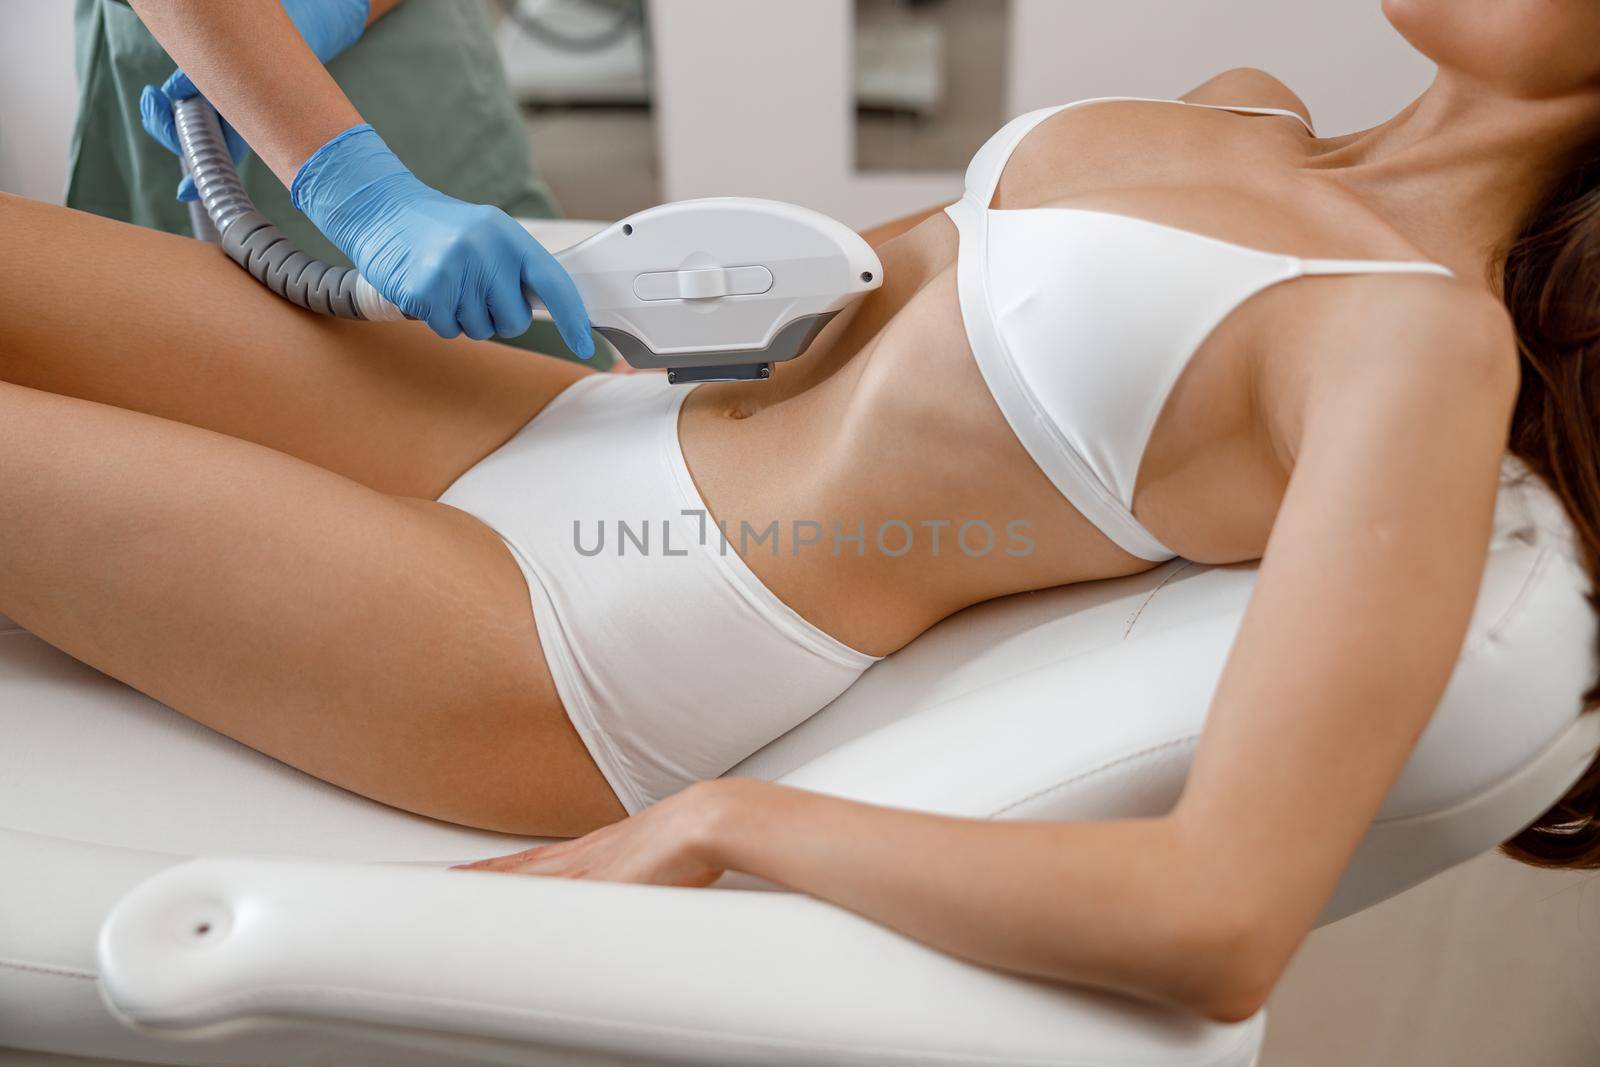 Slim young woman getting photo epilation with ipl machine in beauty salon. Hair removal, cosmetology